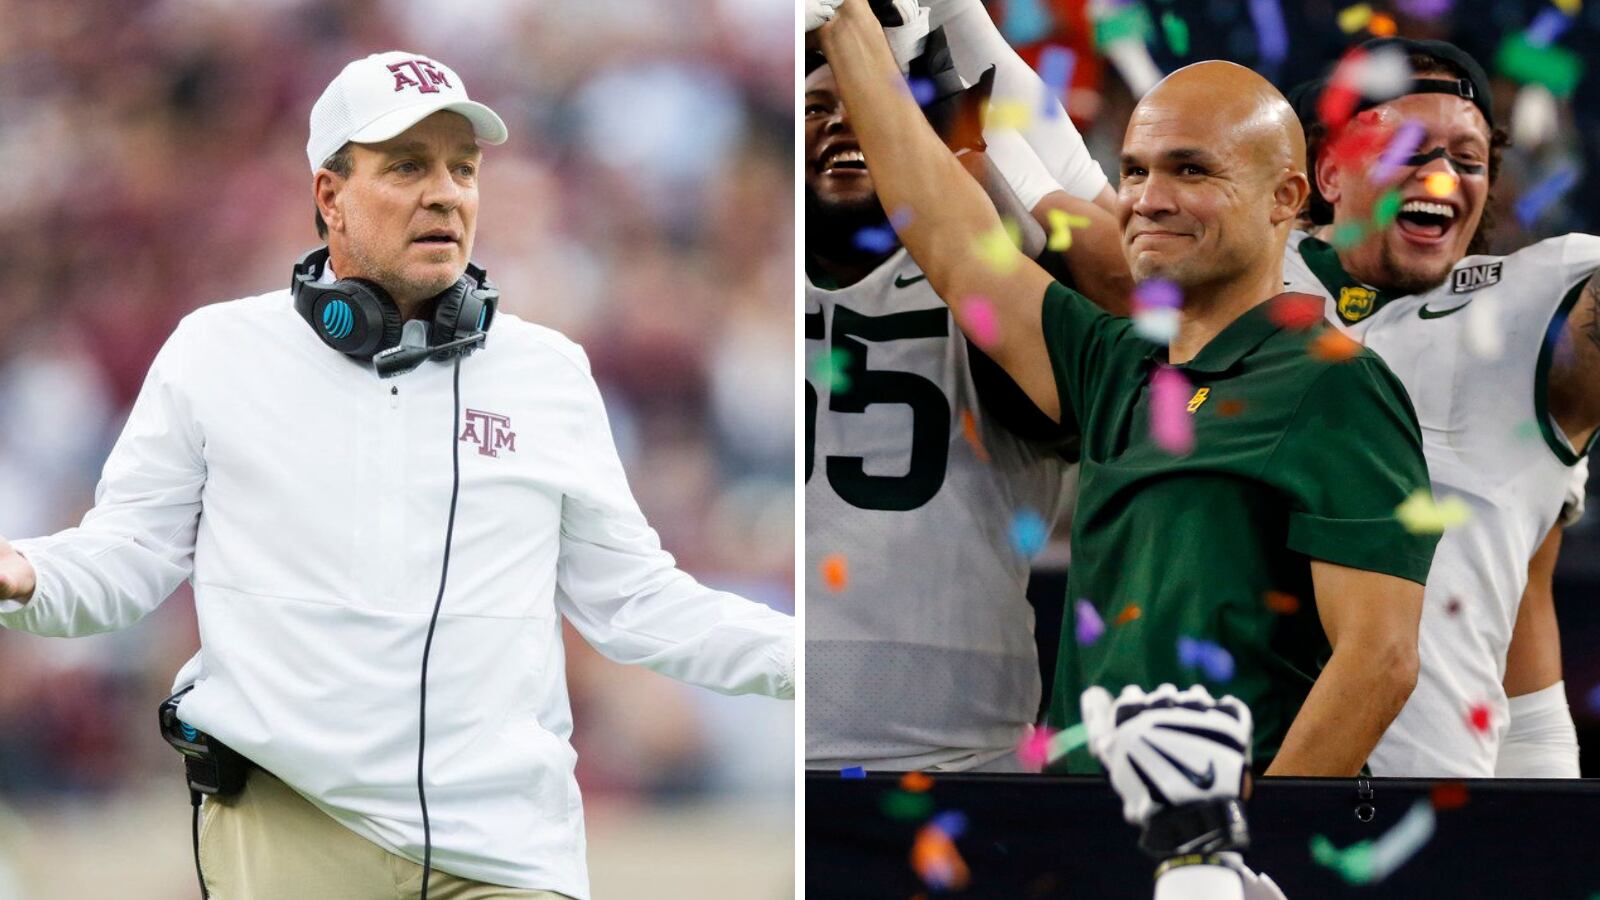 Texas A&M coach Jimbo Fisher (left) and Baylor coach Dave Aranda (right). (Photos by The...